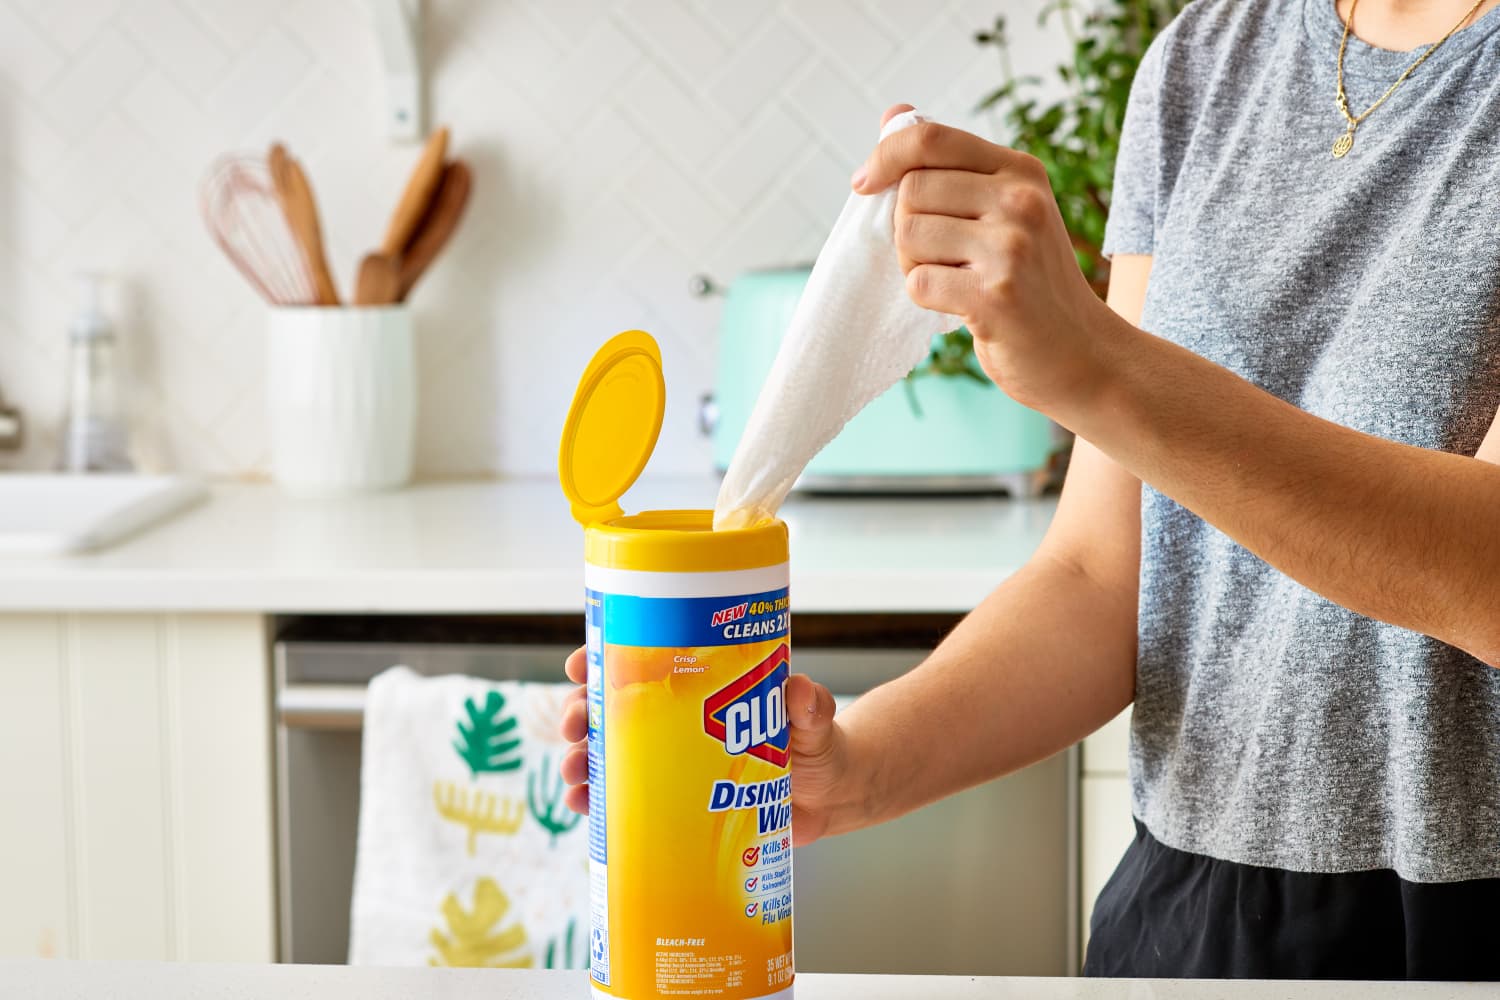 Clorox Wipes on Skin: 7 Things NOT to Use Clorox Wipes on